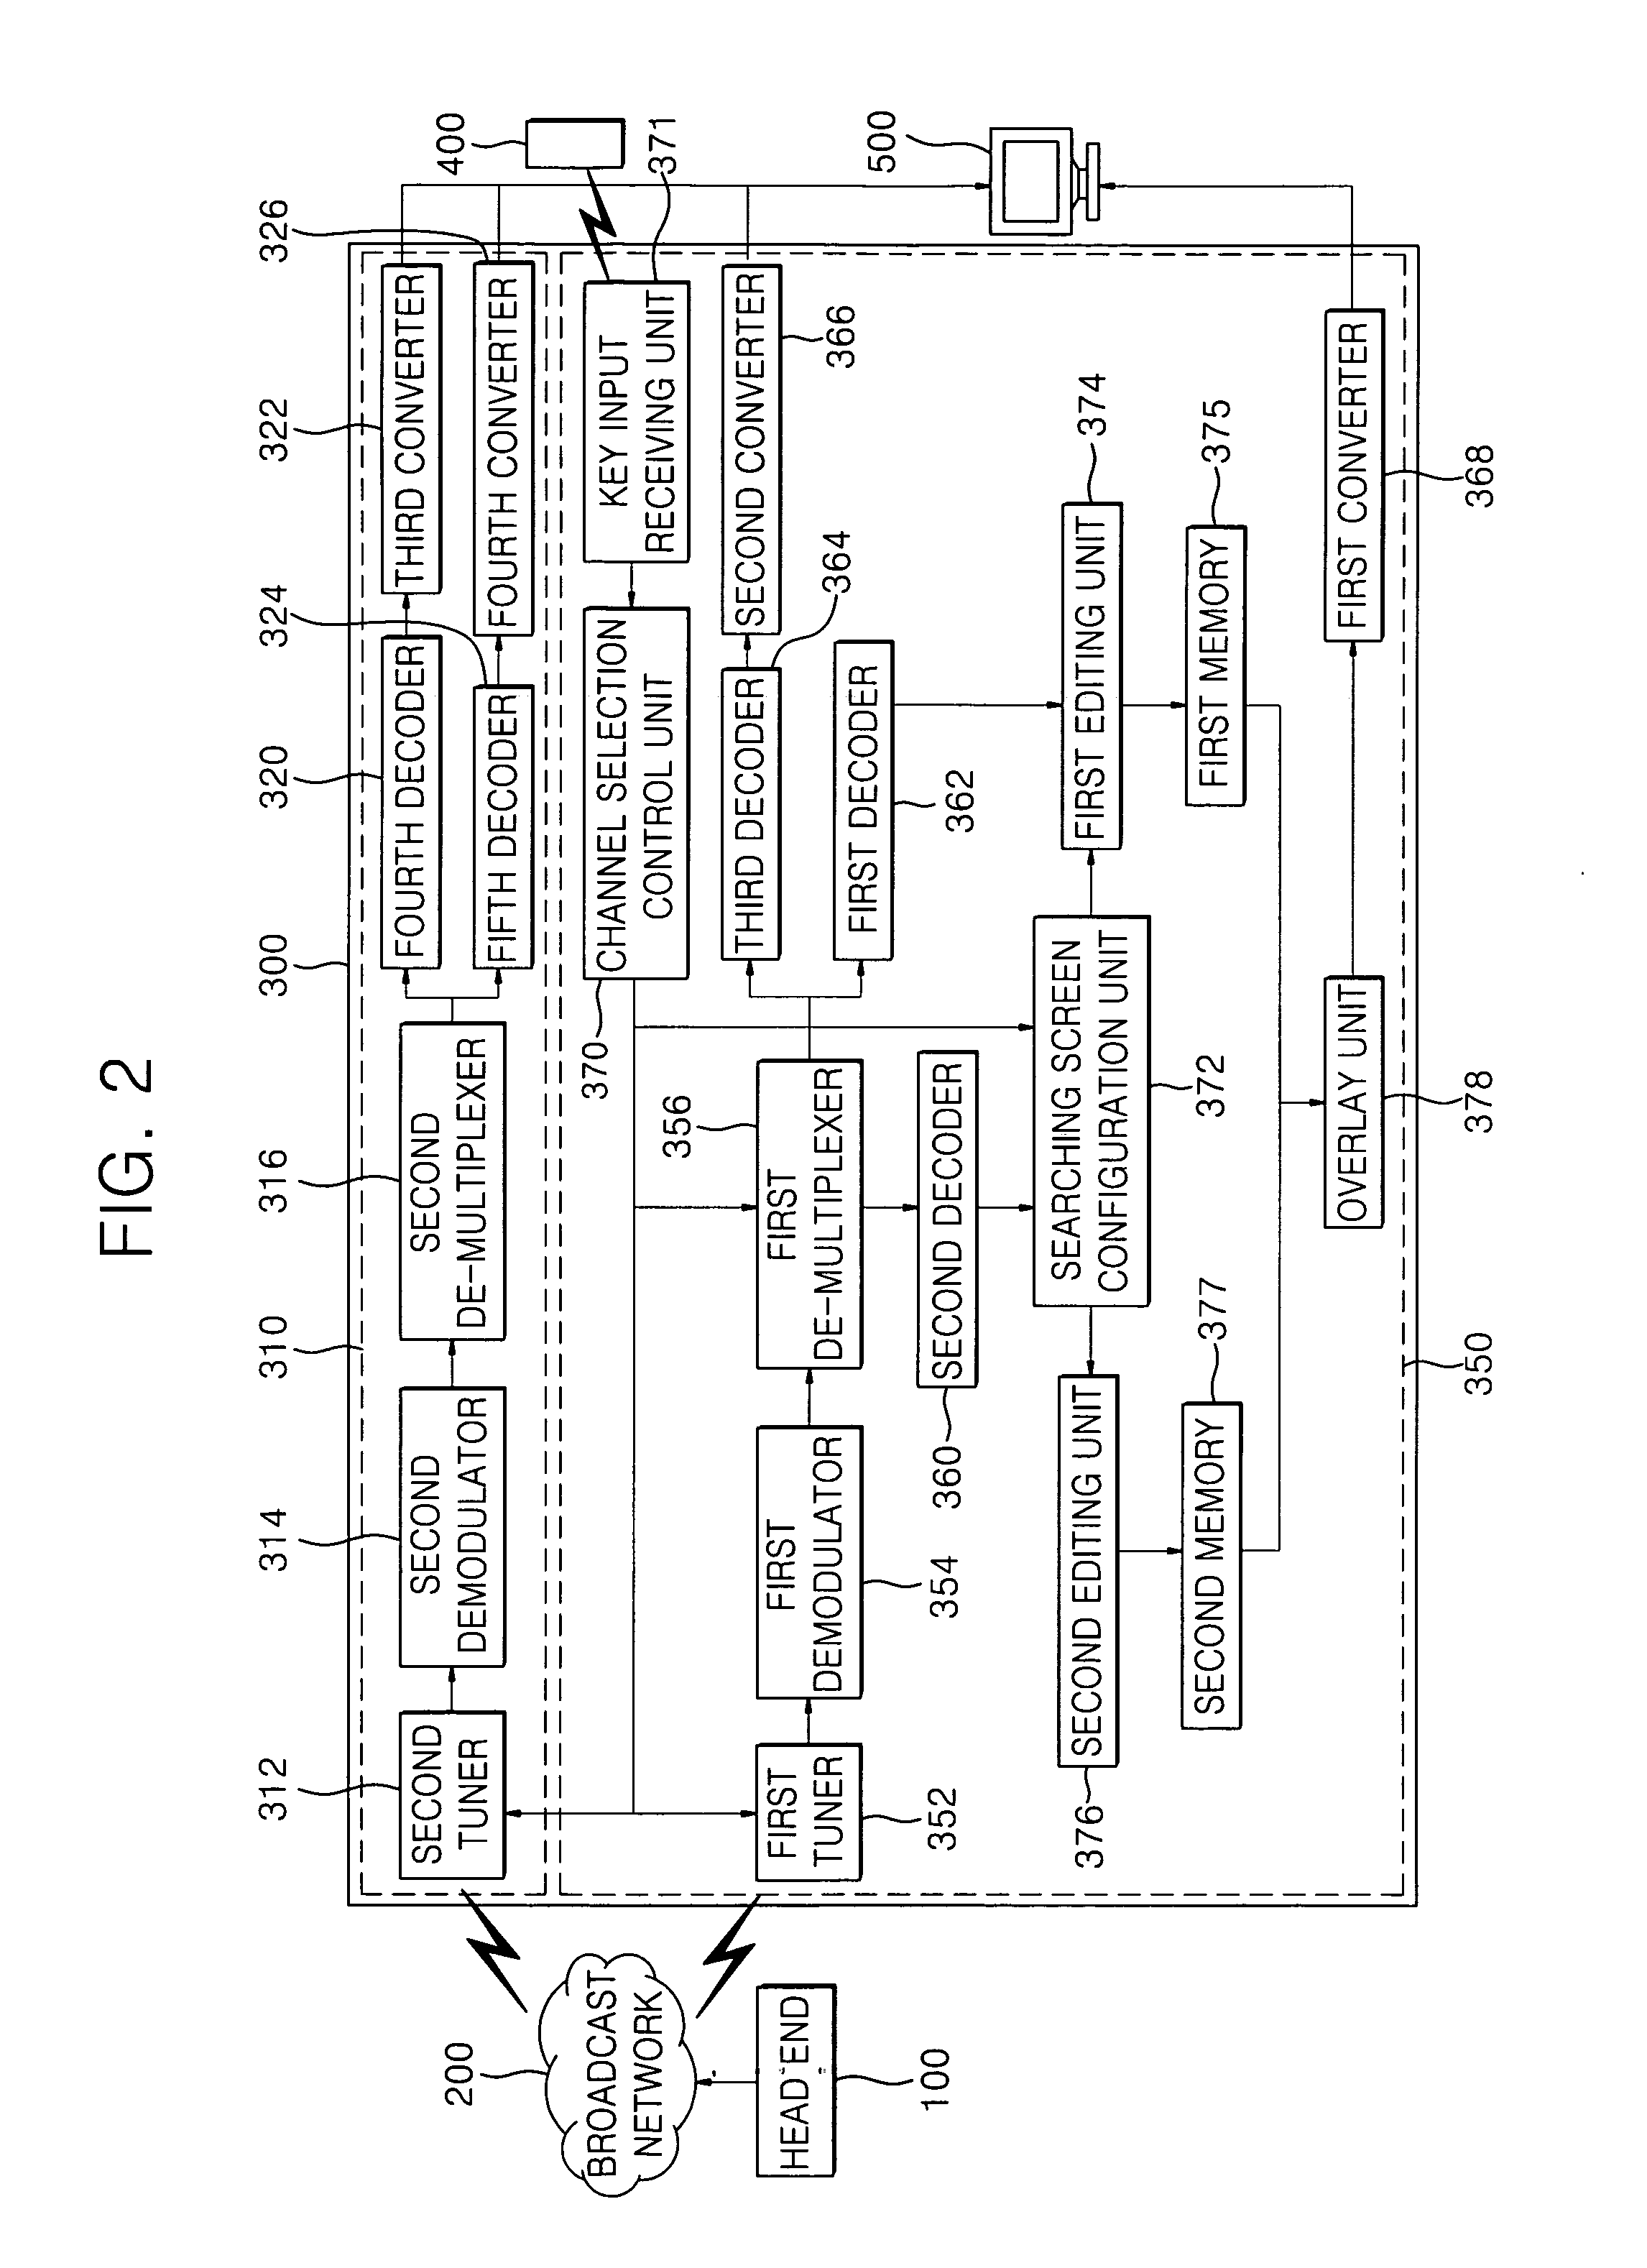 Channel selection device and method